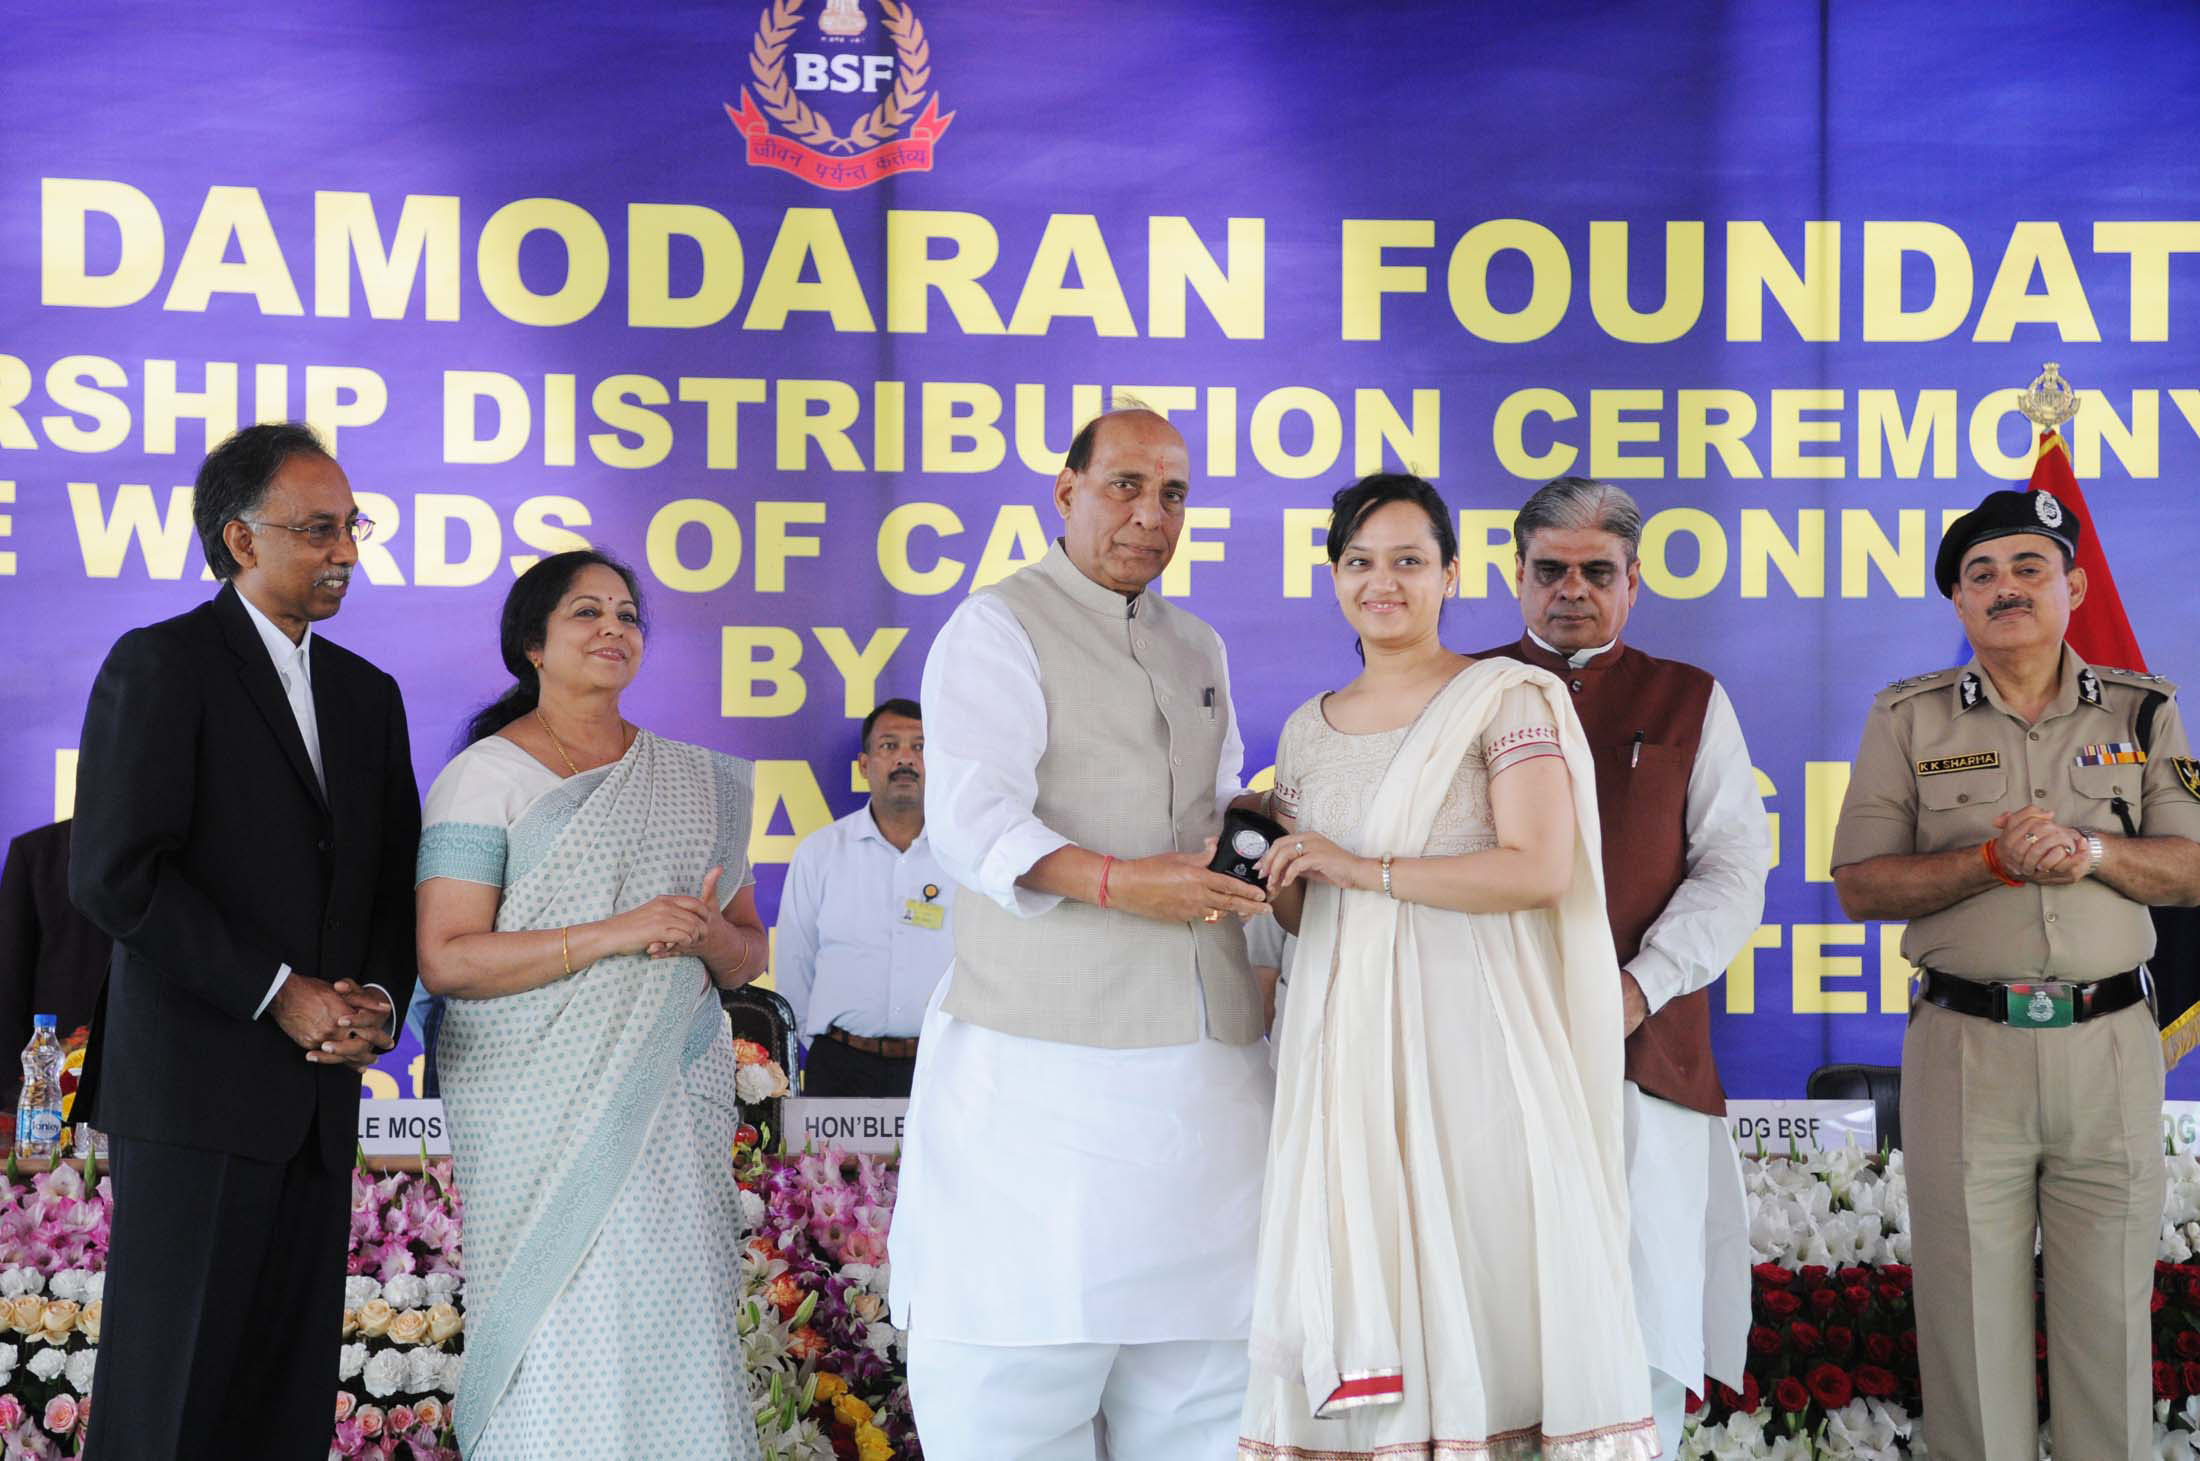 The Union Home Minister, Shri Rajnath Singh distributed the Sarojini Damodaran Foundation Scholarship, at a function, in New Delhi on March 18, 2016. 	The Minister of State for Home Affairs, Shri Haribhai Parthibhai Chaudhary and other dignitaries are also seen.